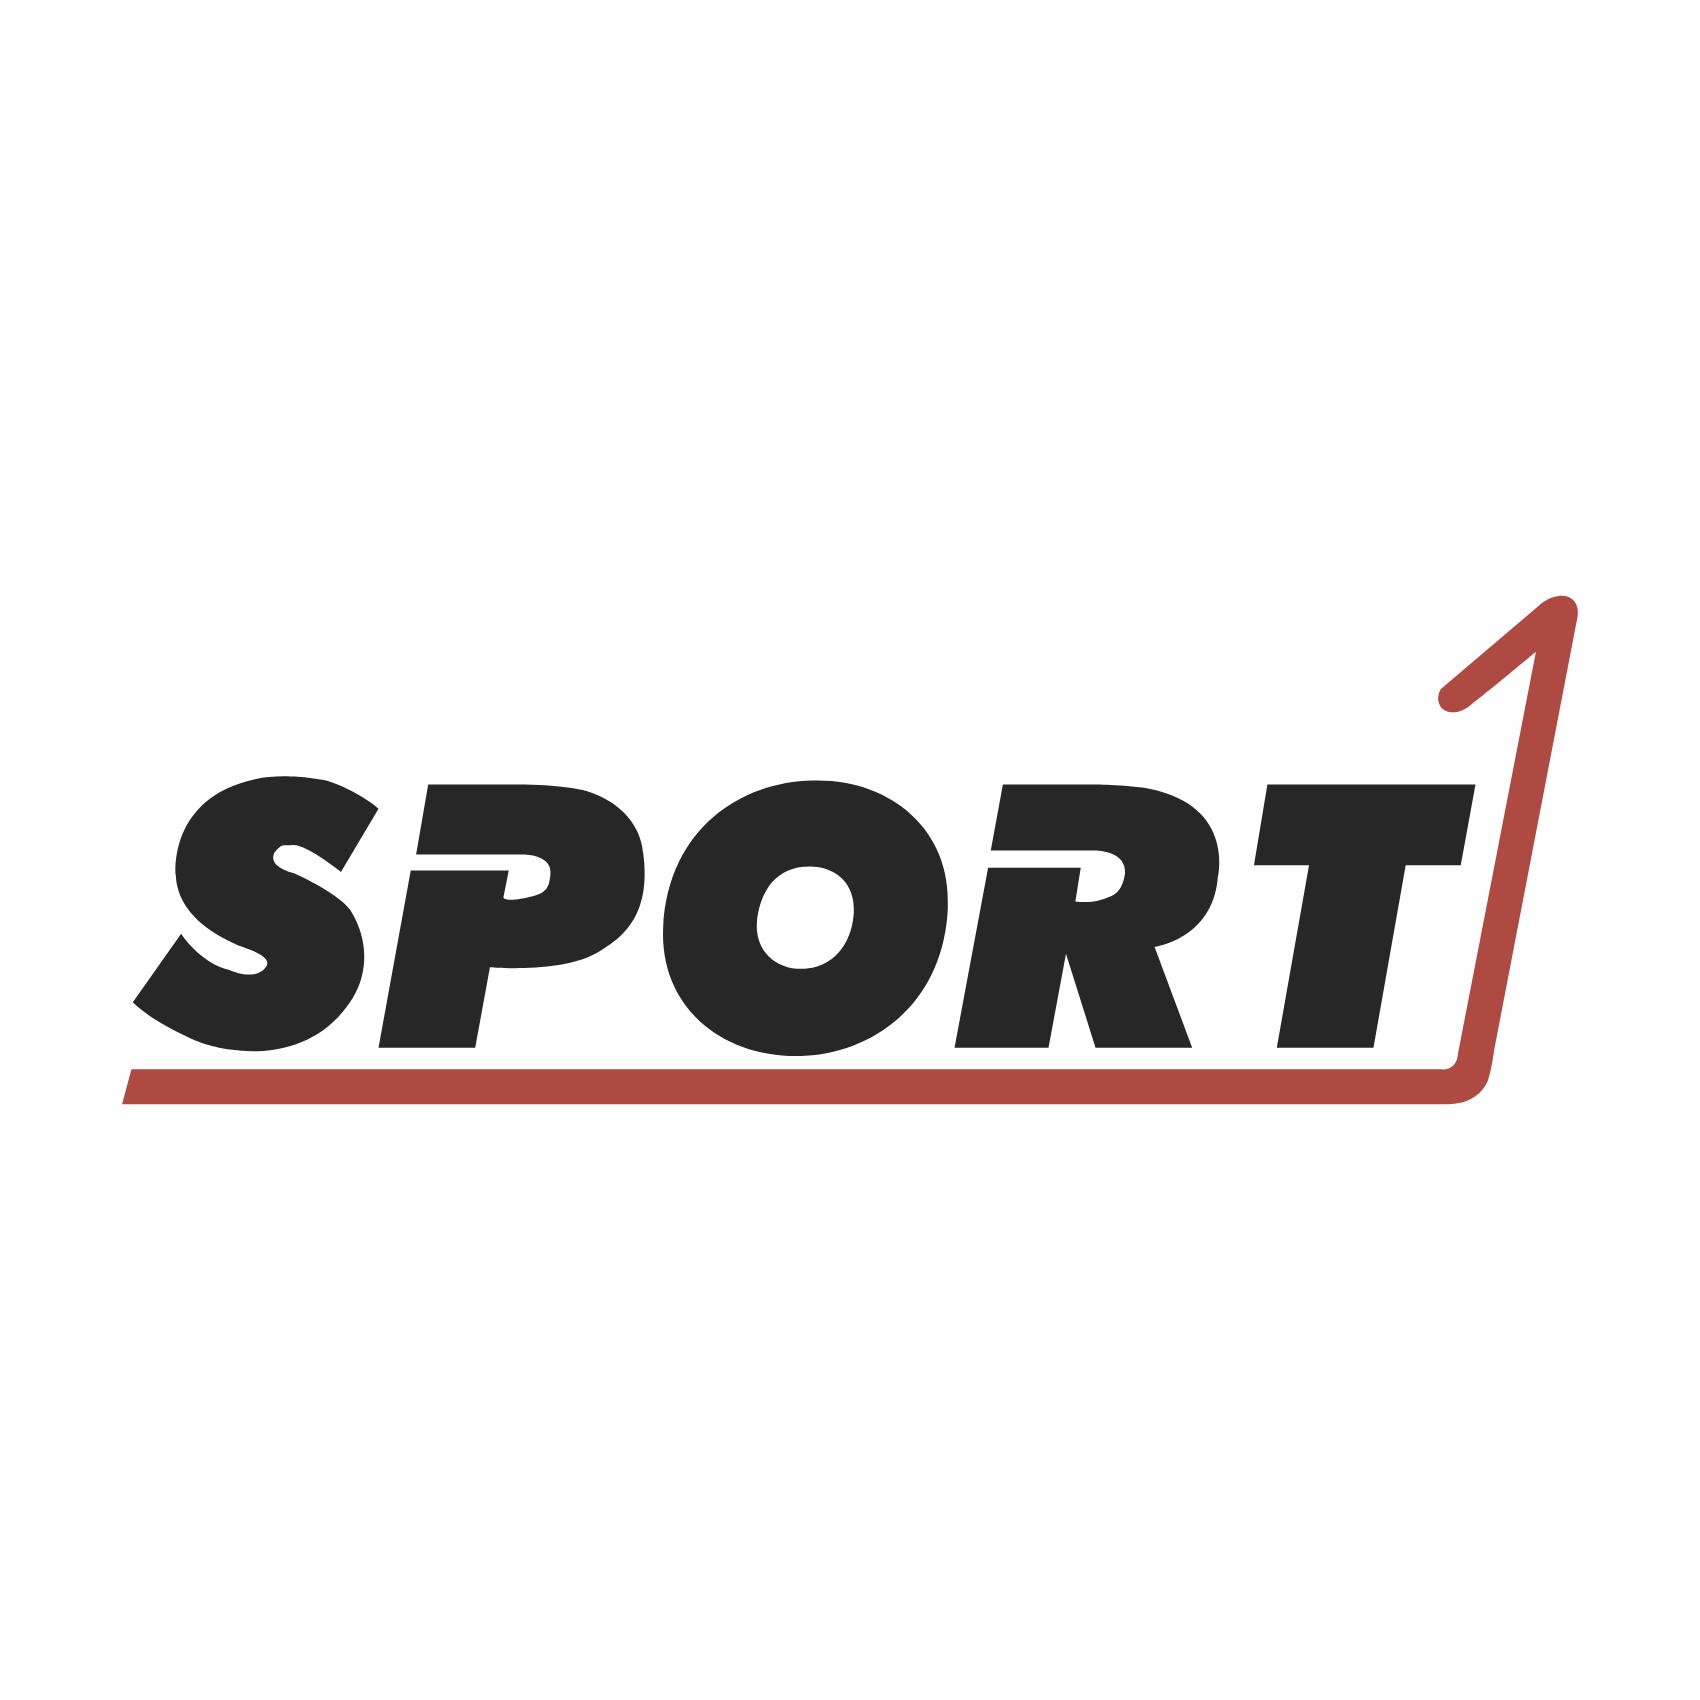 Download Sport1 Logo PNG and Vector (PDF, SVG, Ai, EPS) Free